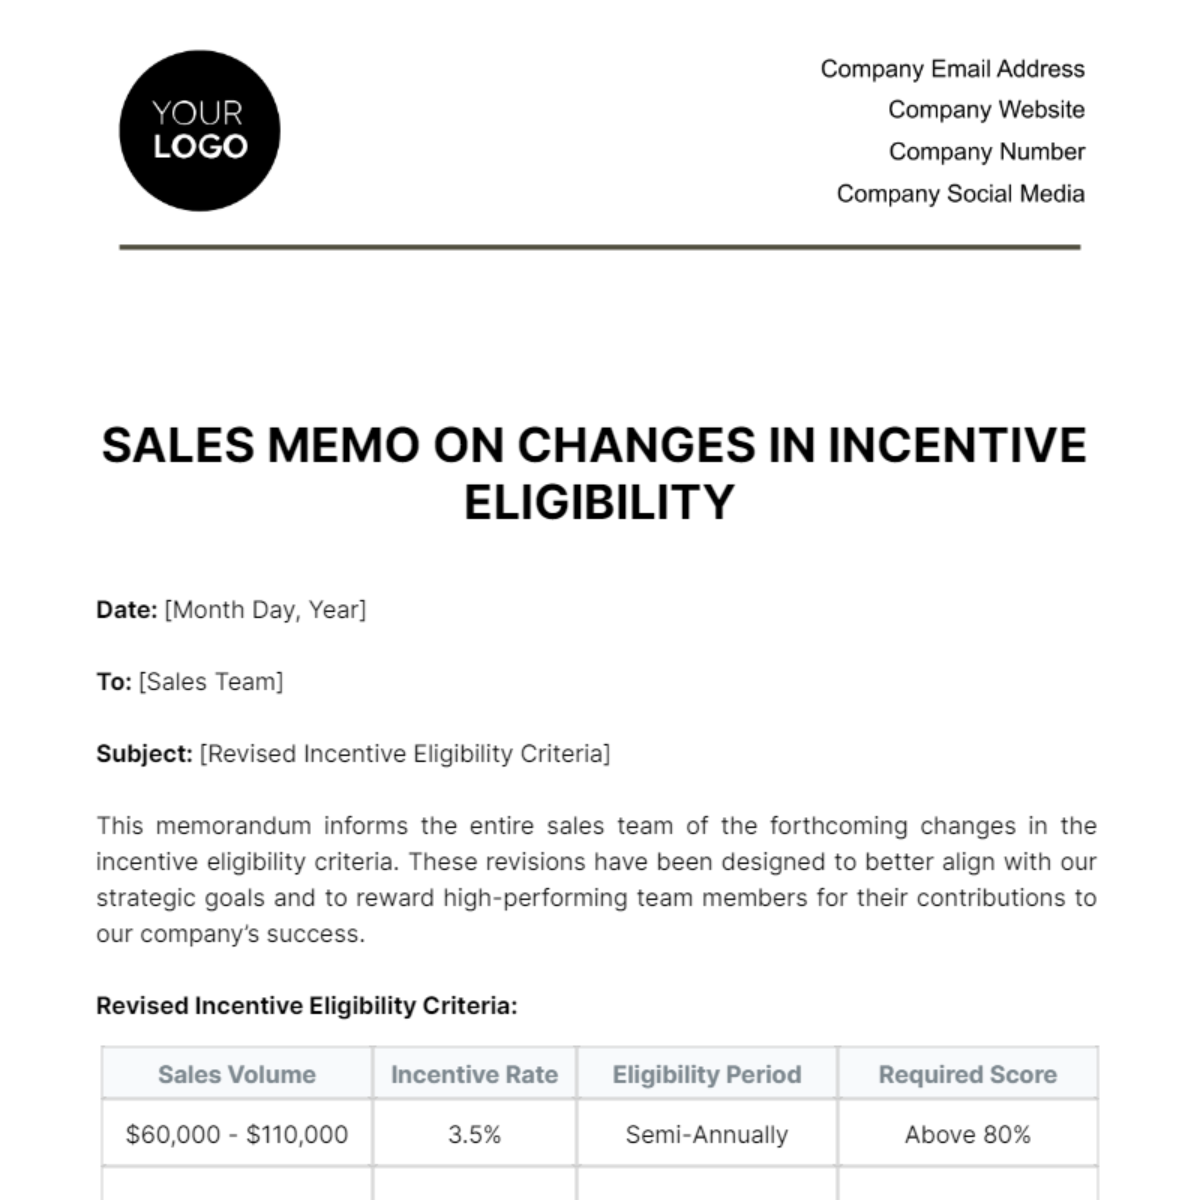 Free Sales Memo on Changes in Incentive Eligibility Template